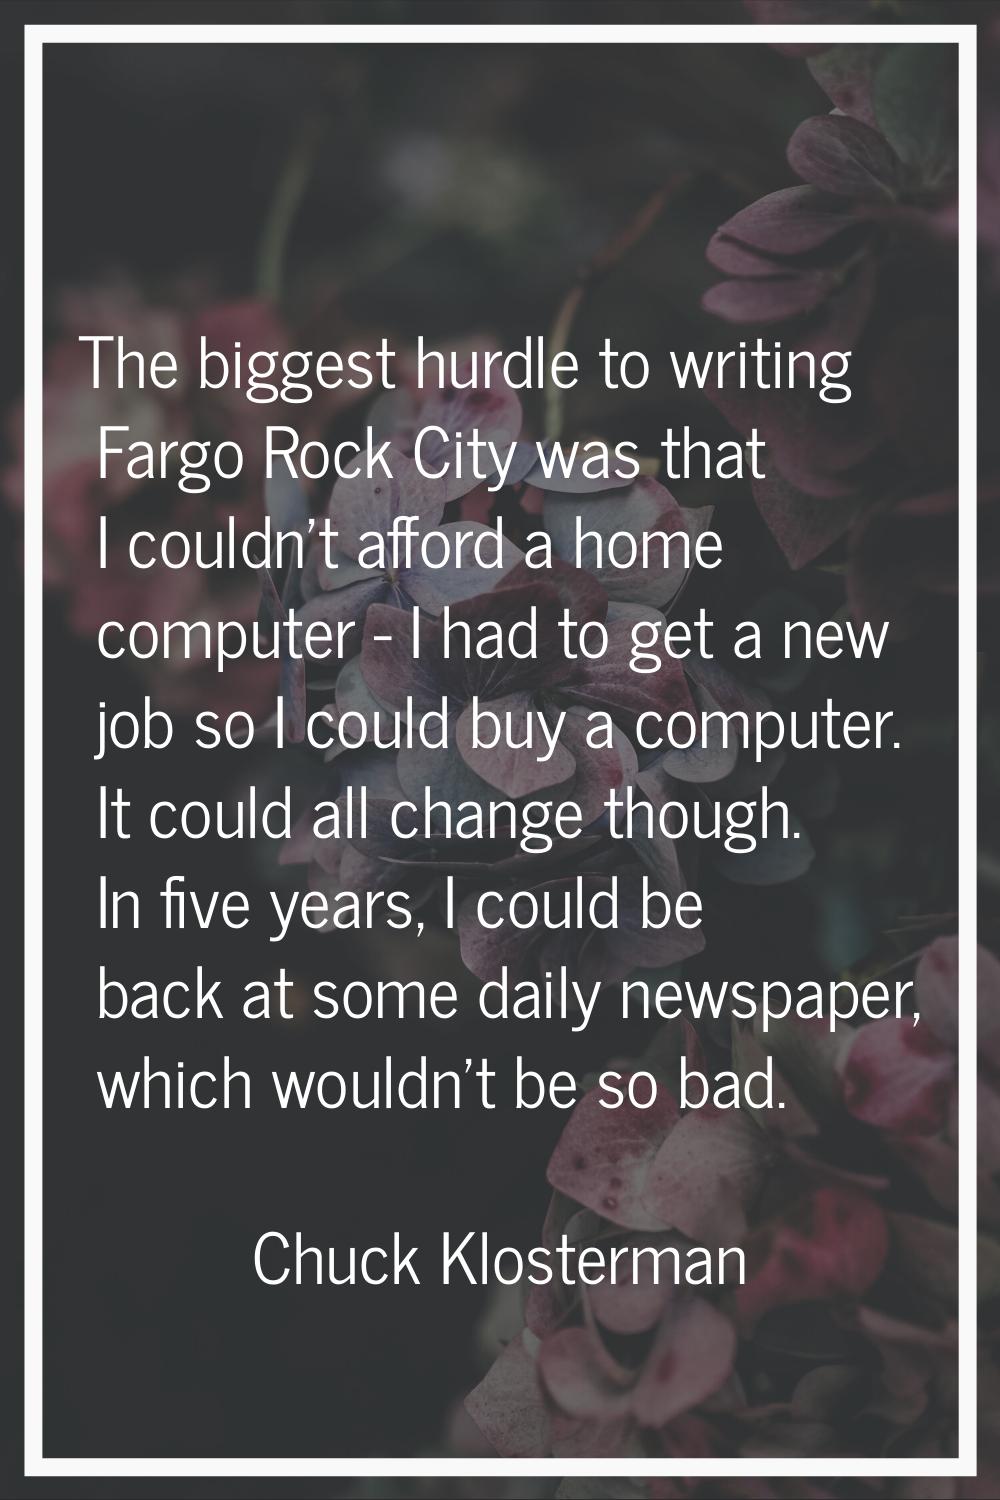 The biggest hurdle to writing Fargo Rock City was that I couldn't afford a home computer - I had to